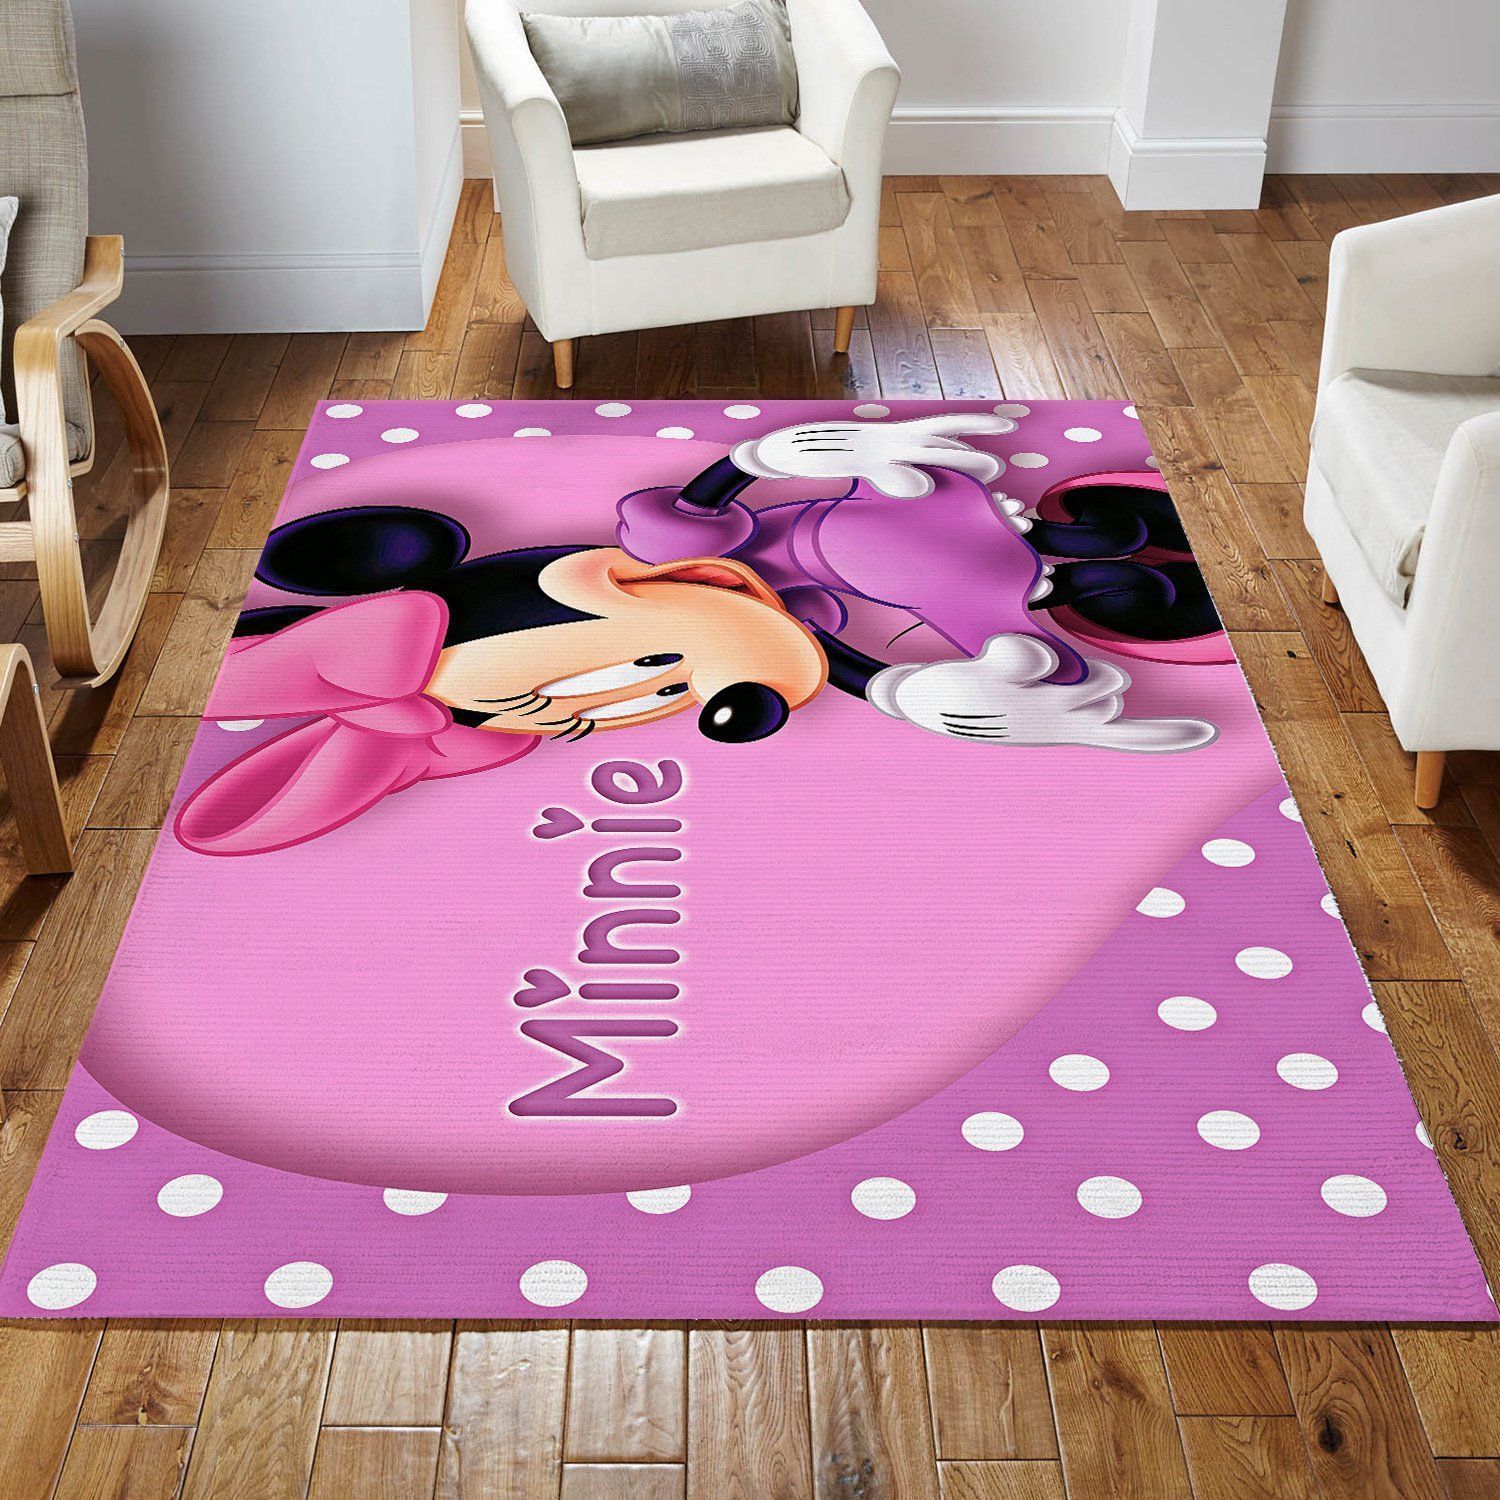 Minnie Mouse Area Rugs Disney Movies Living Room Carpet FN121207 Local Brands Floor Decor The US Decor - Indoor Outdoor Rugs 3